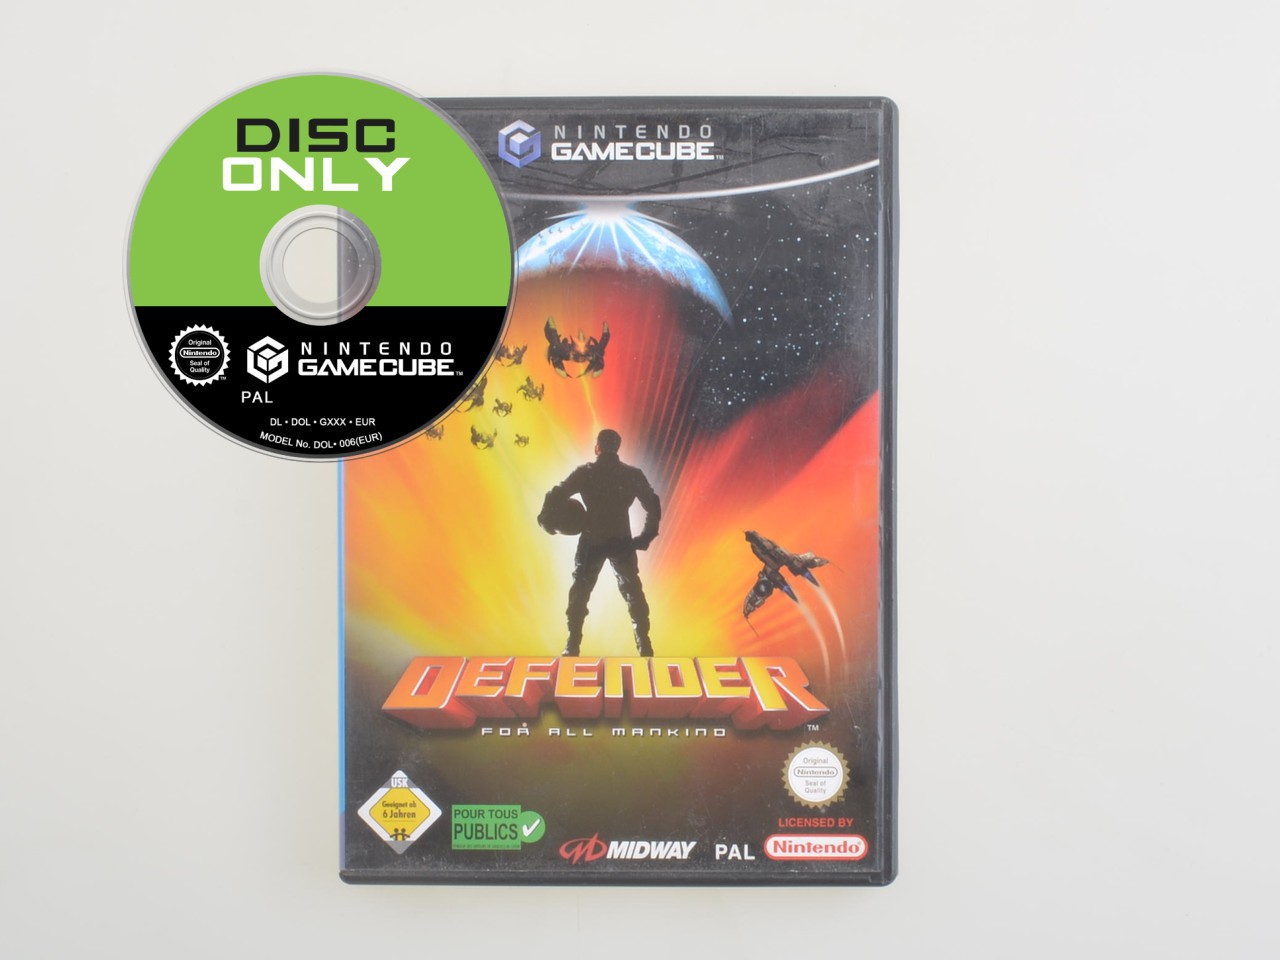 Defender For all Mankind - Disc Only - Gamecube Games